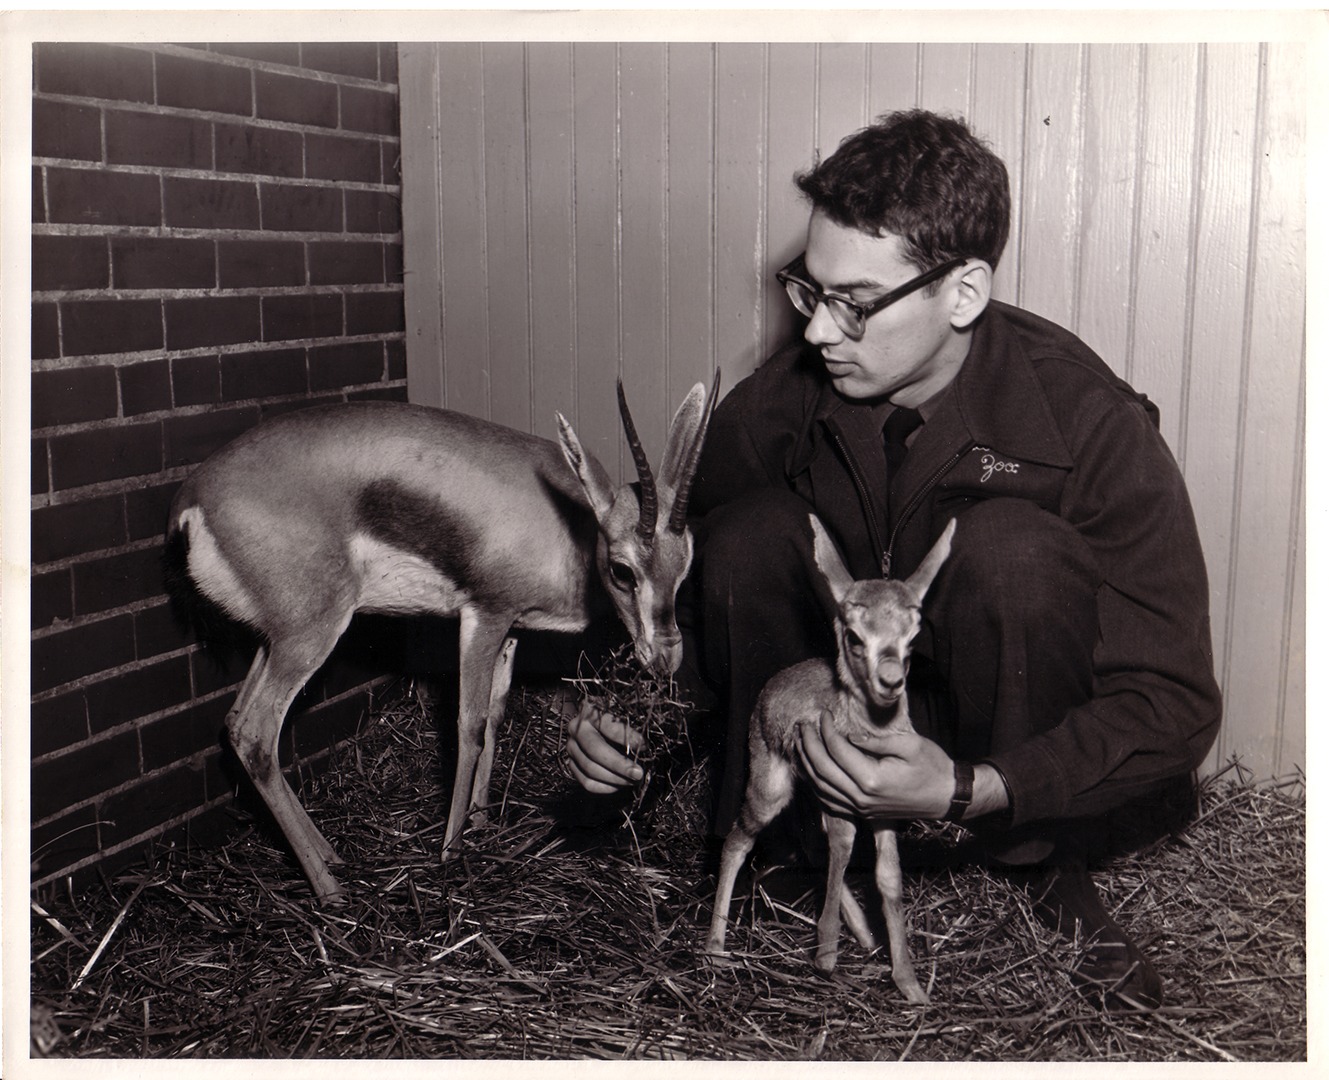 Zoologist Don Nickon with mother & baby gazelle